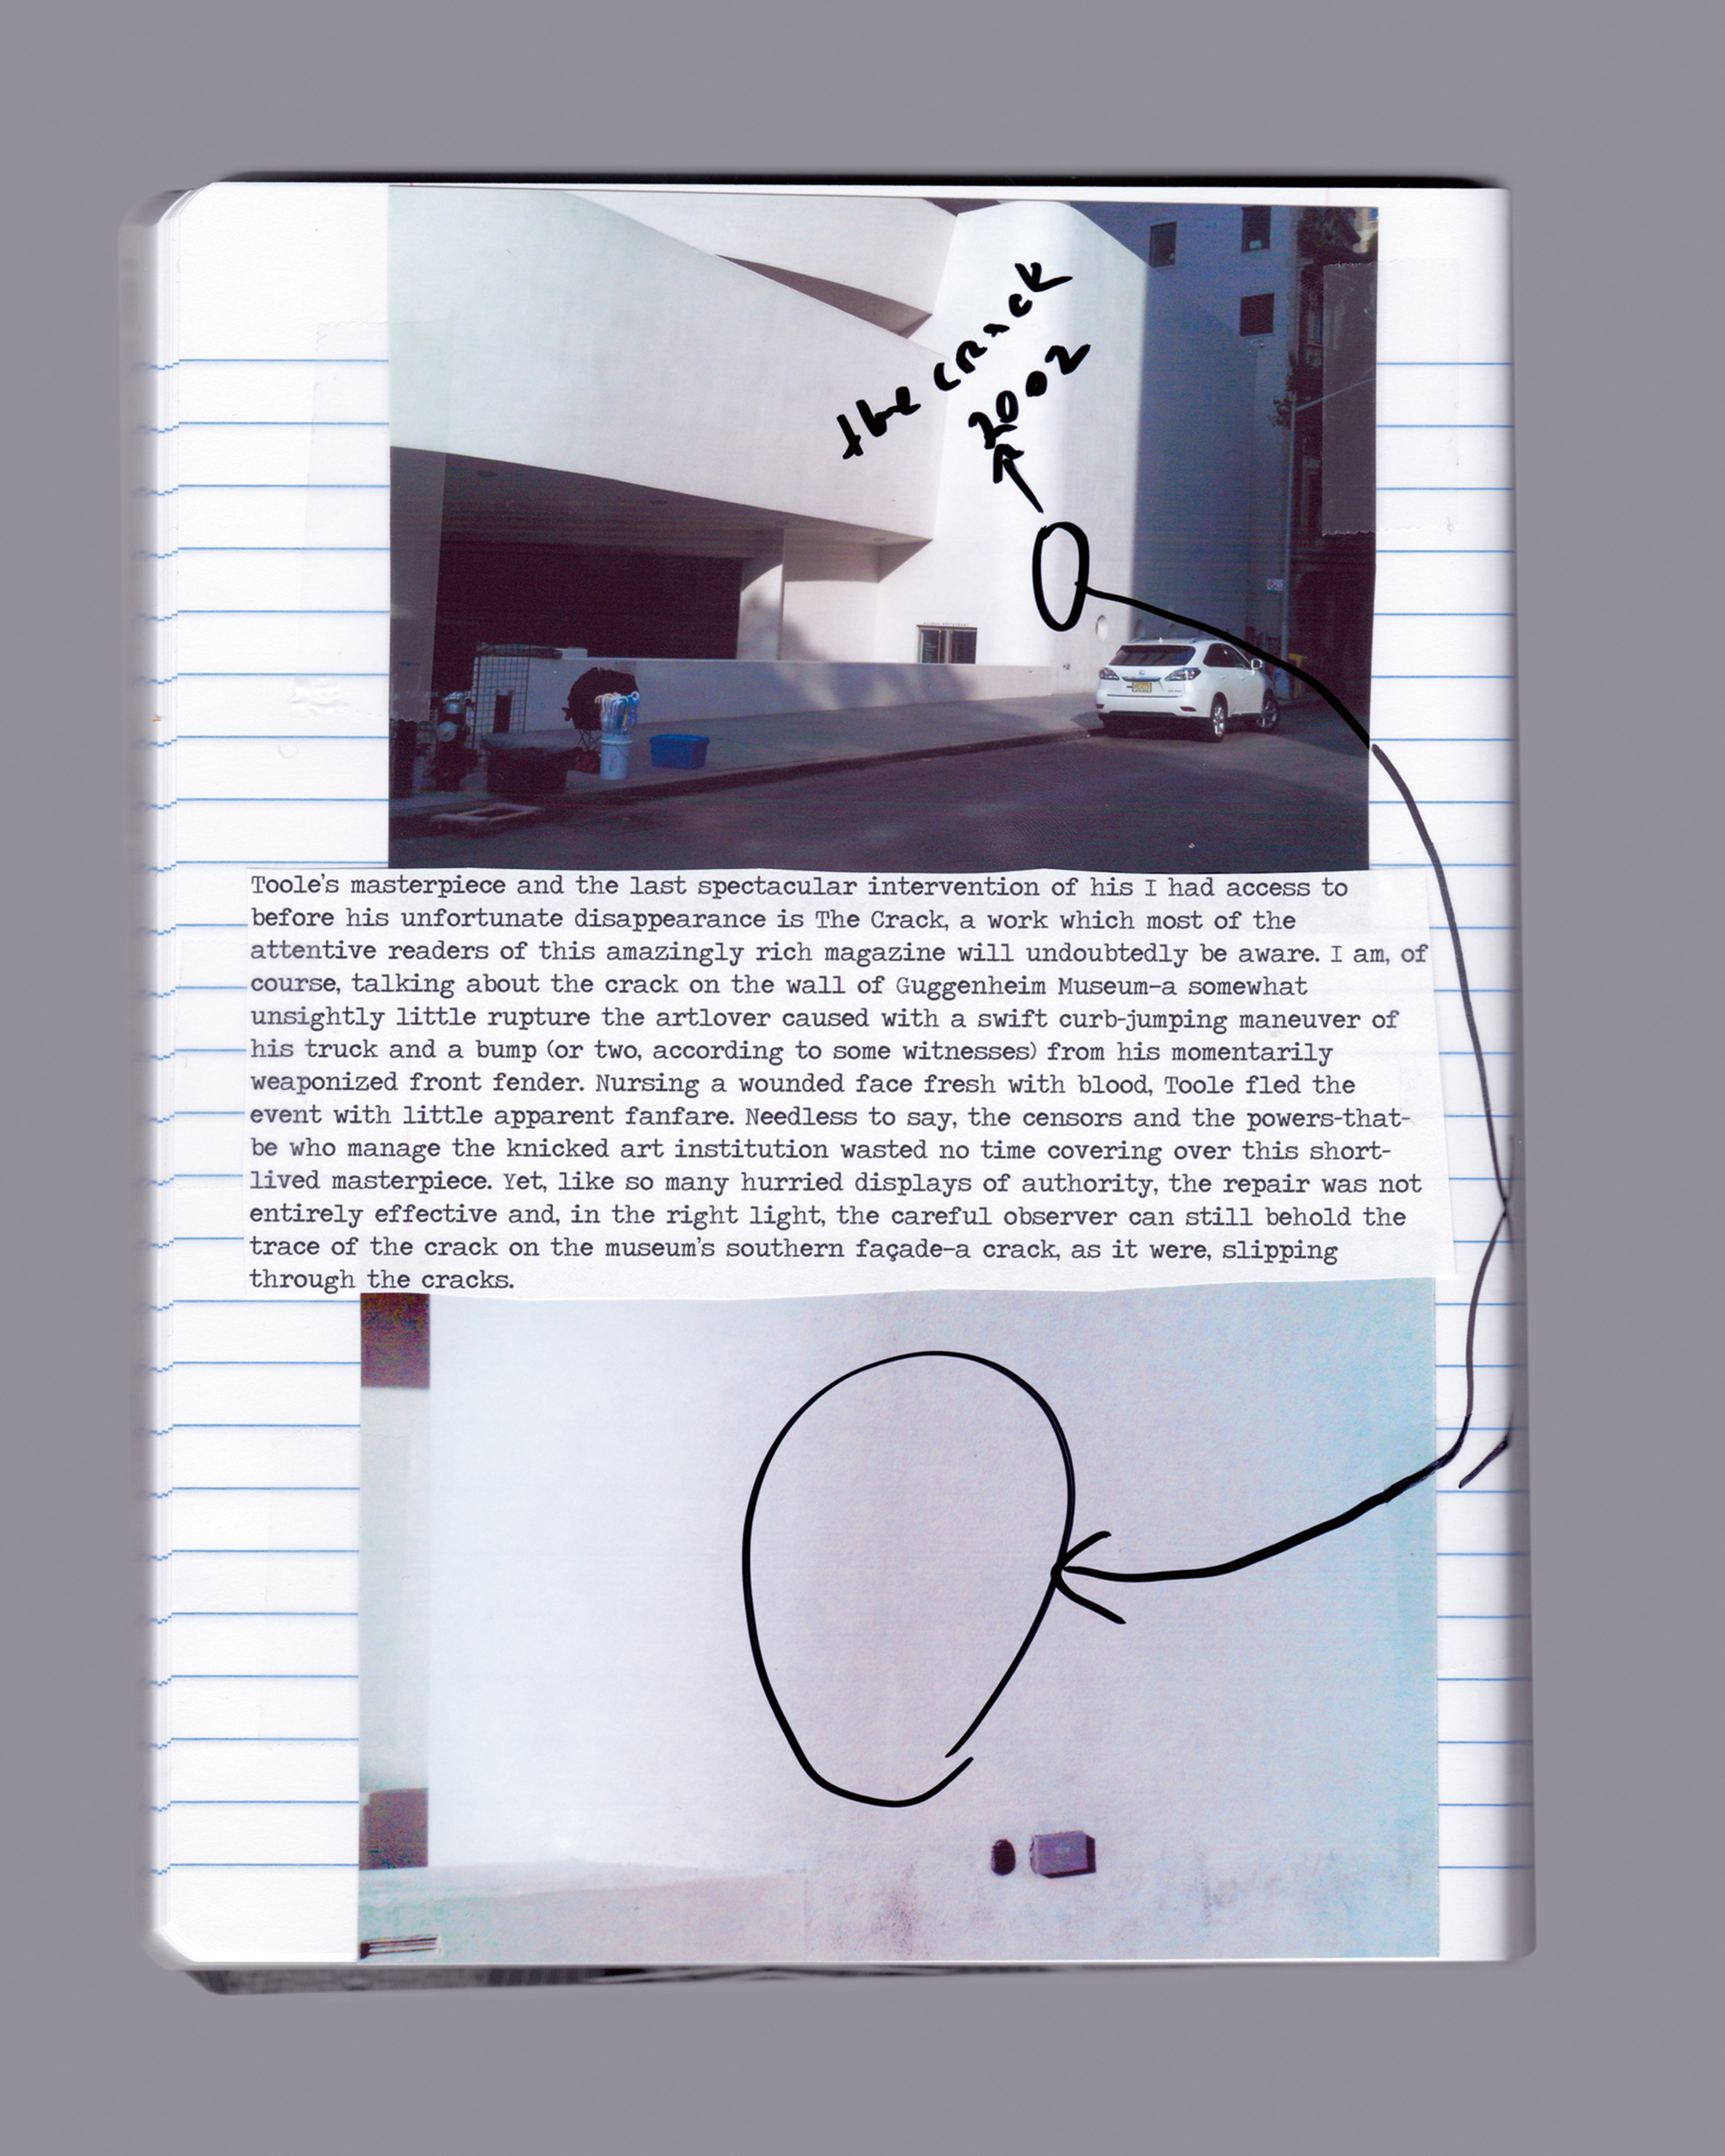 A scan of a notebook from Serkan Ozkaya‘s series titled “The Artlover: Searching for Steven Toole.”